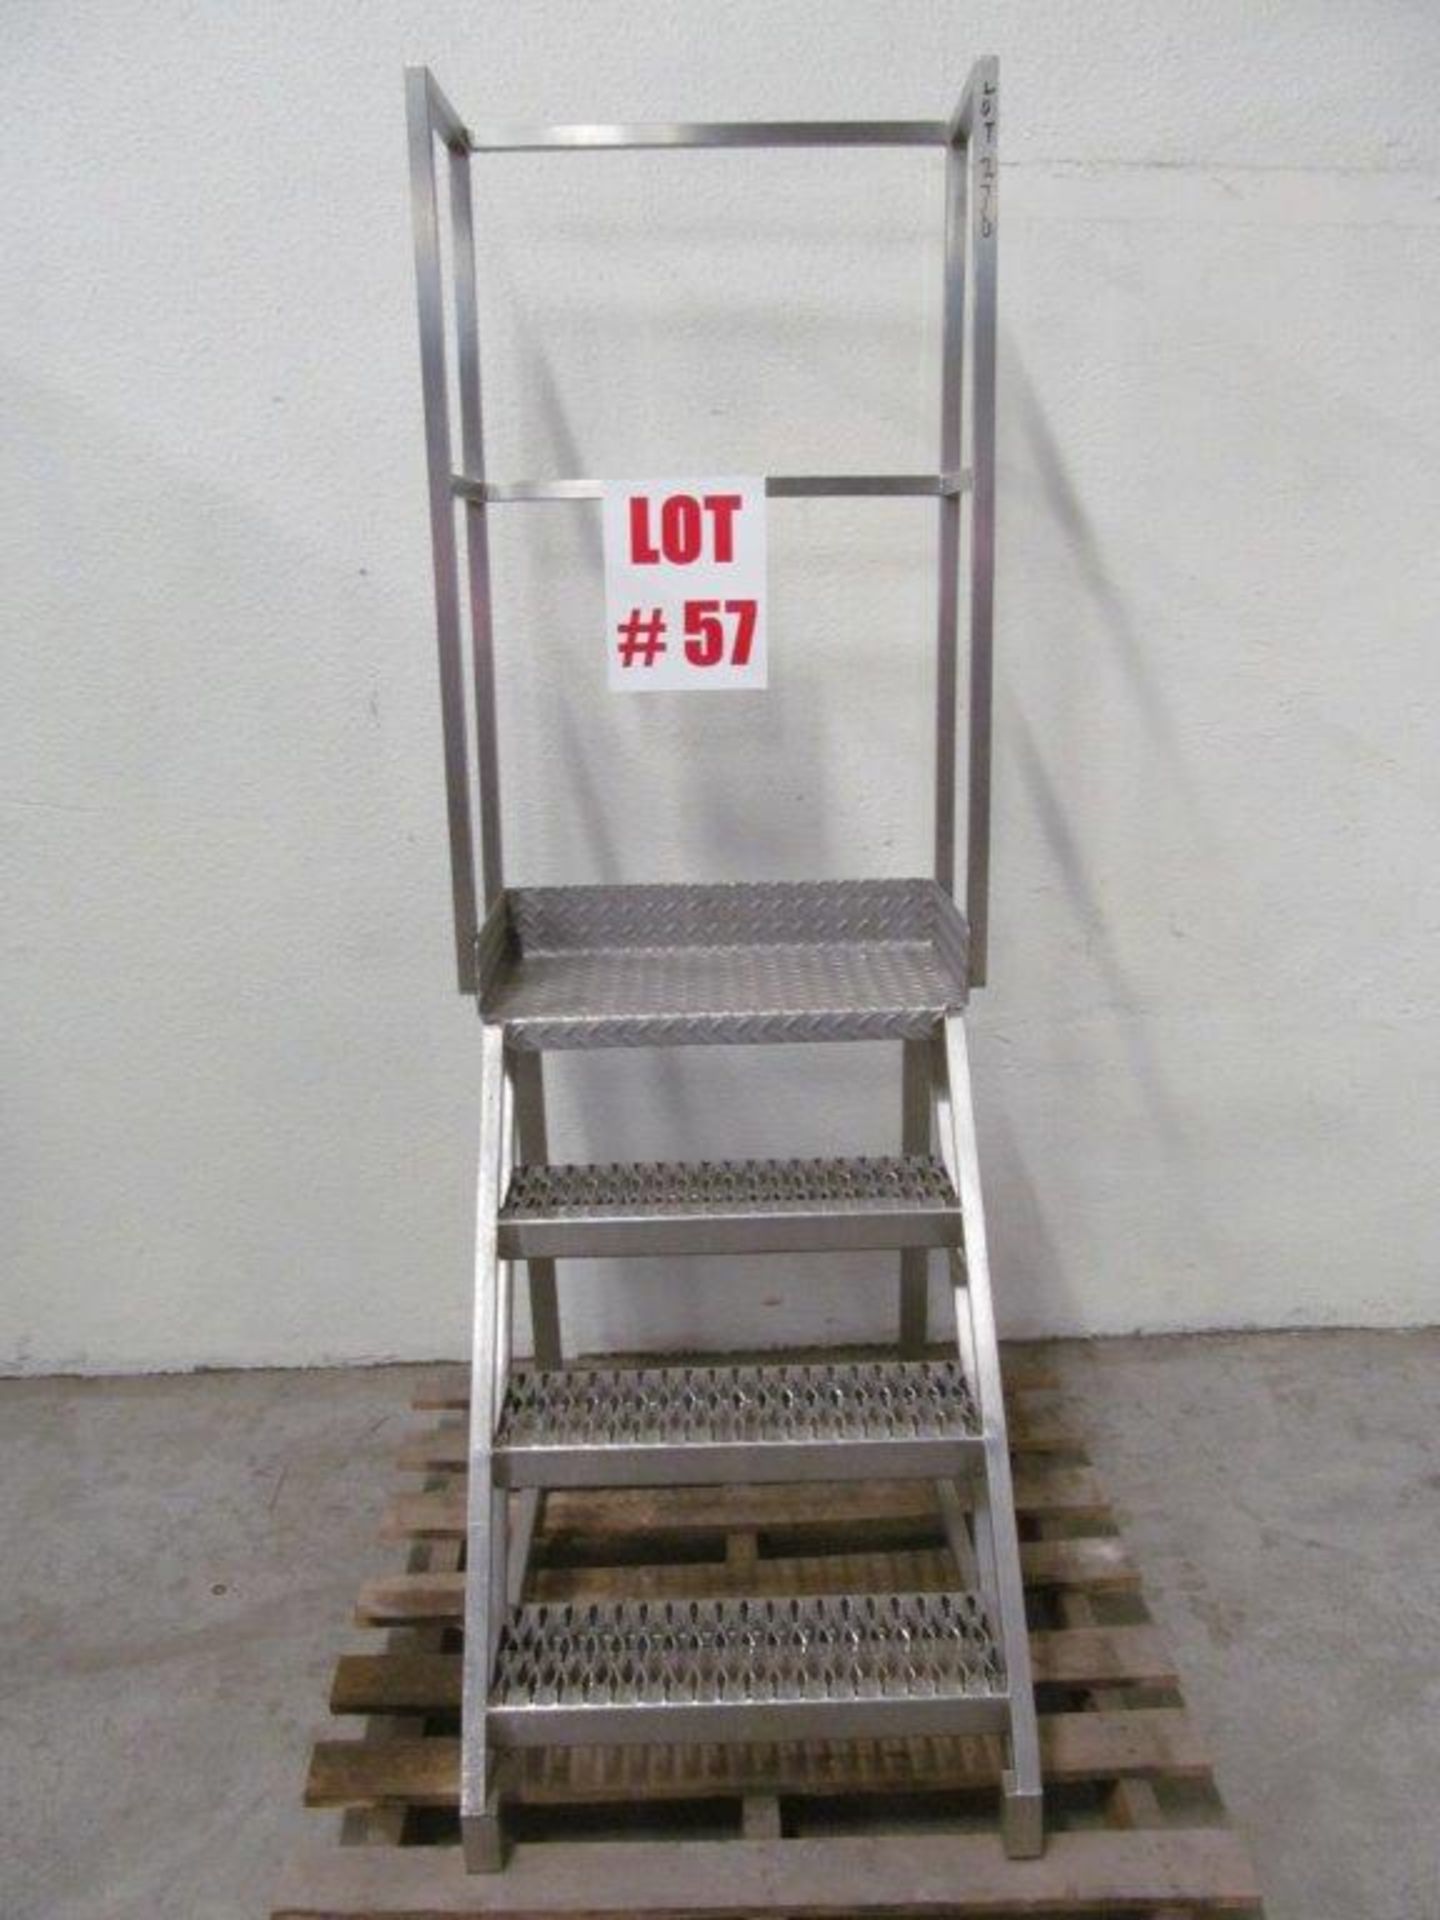 STAINLESS STEEL LADDER, 4 STEP, 24'' WIDE, 29'' HEIGHT - Image 2 of 3